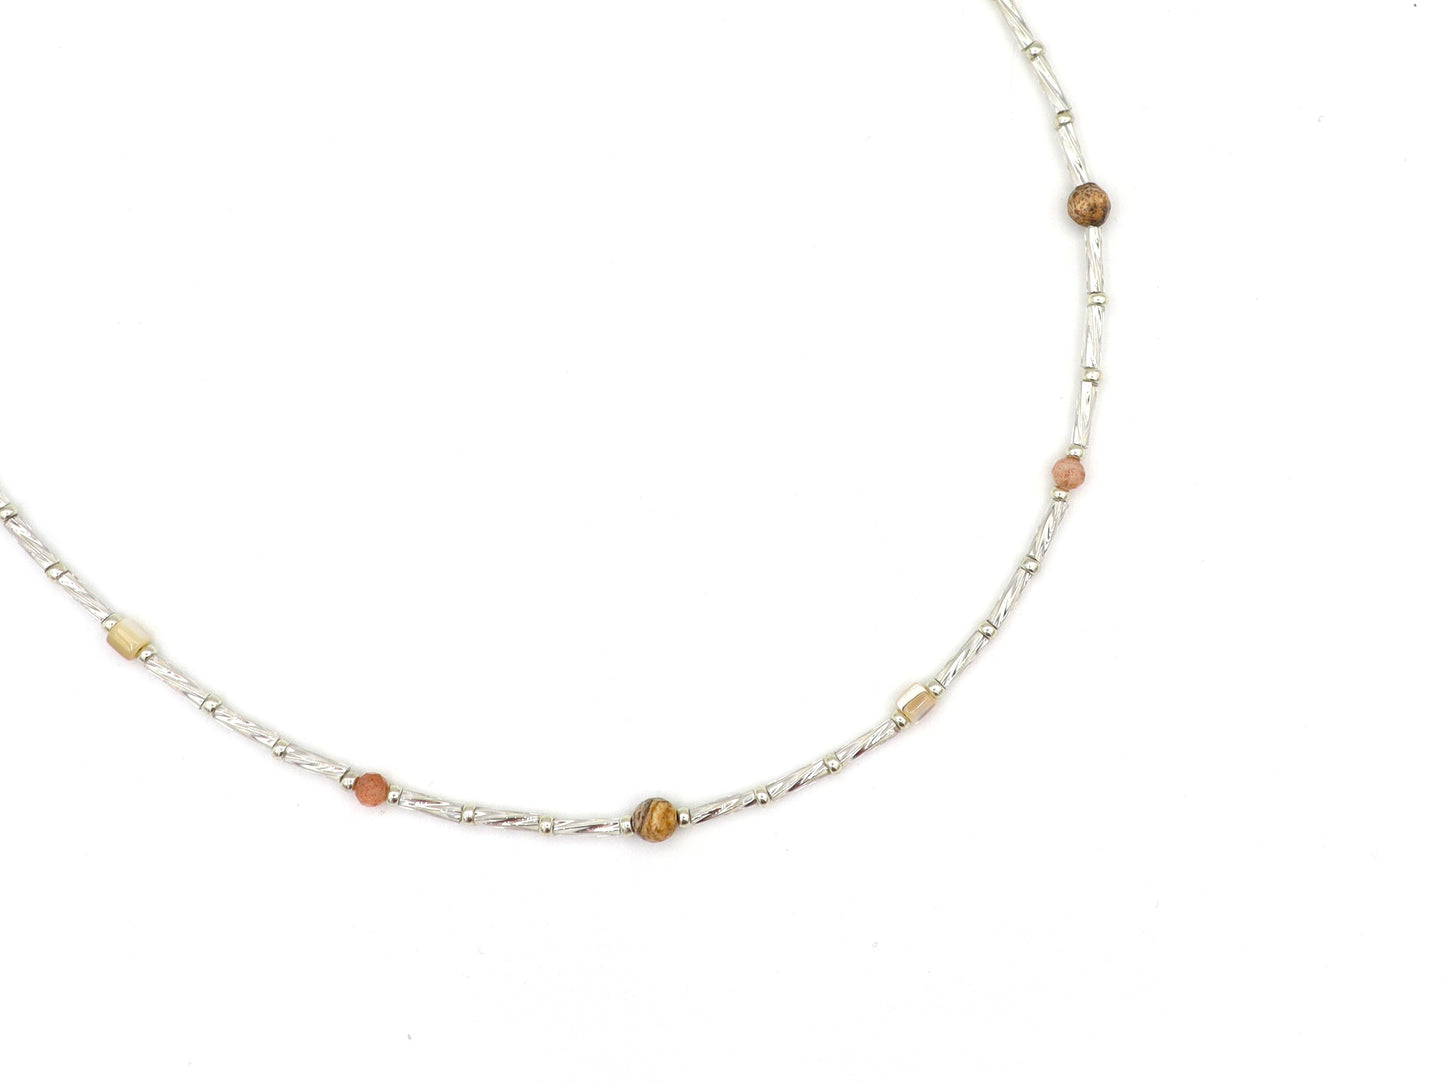 Necklace Fira jasper and sunstone, silver or gold stainless steel